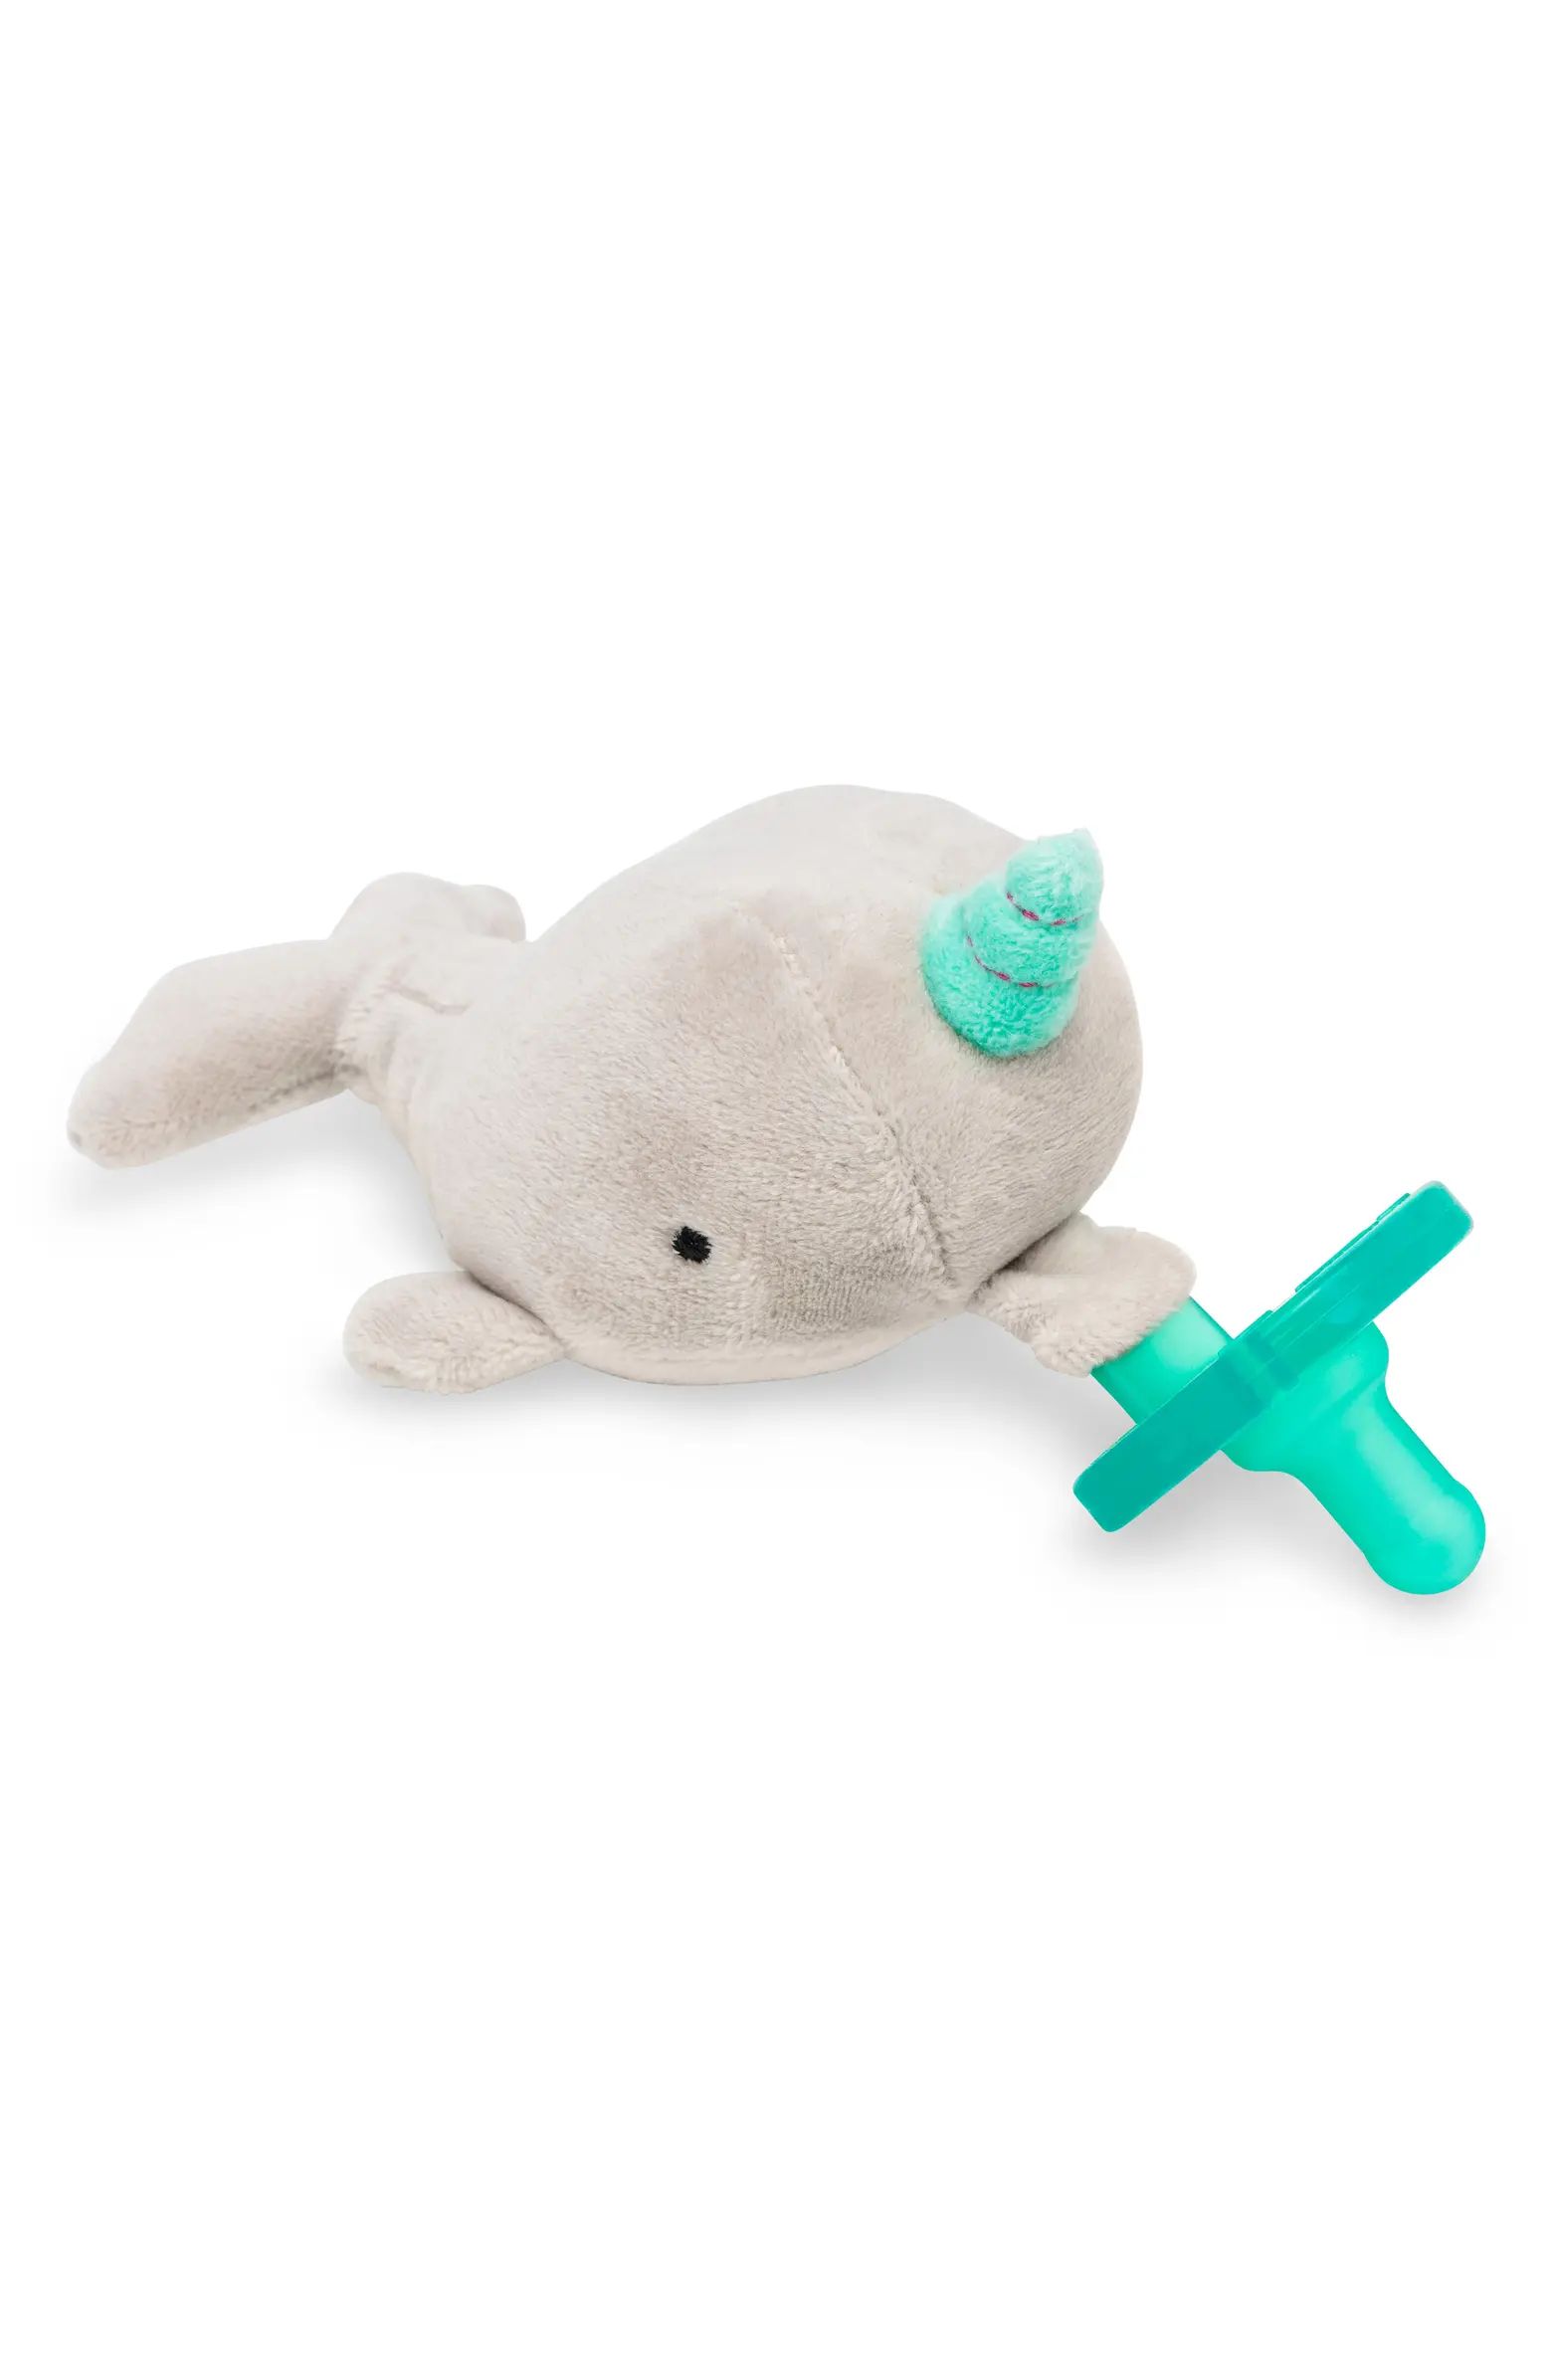 Plush Pacifier Toy | Nordstrom